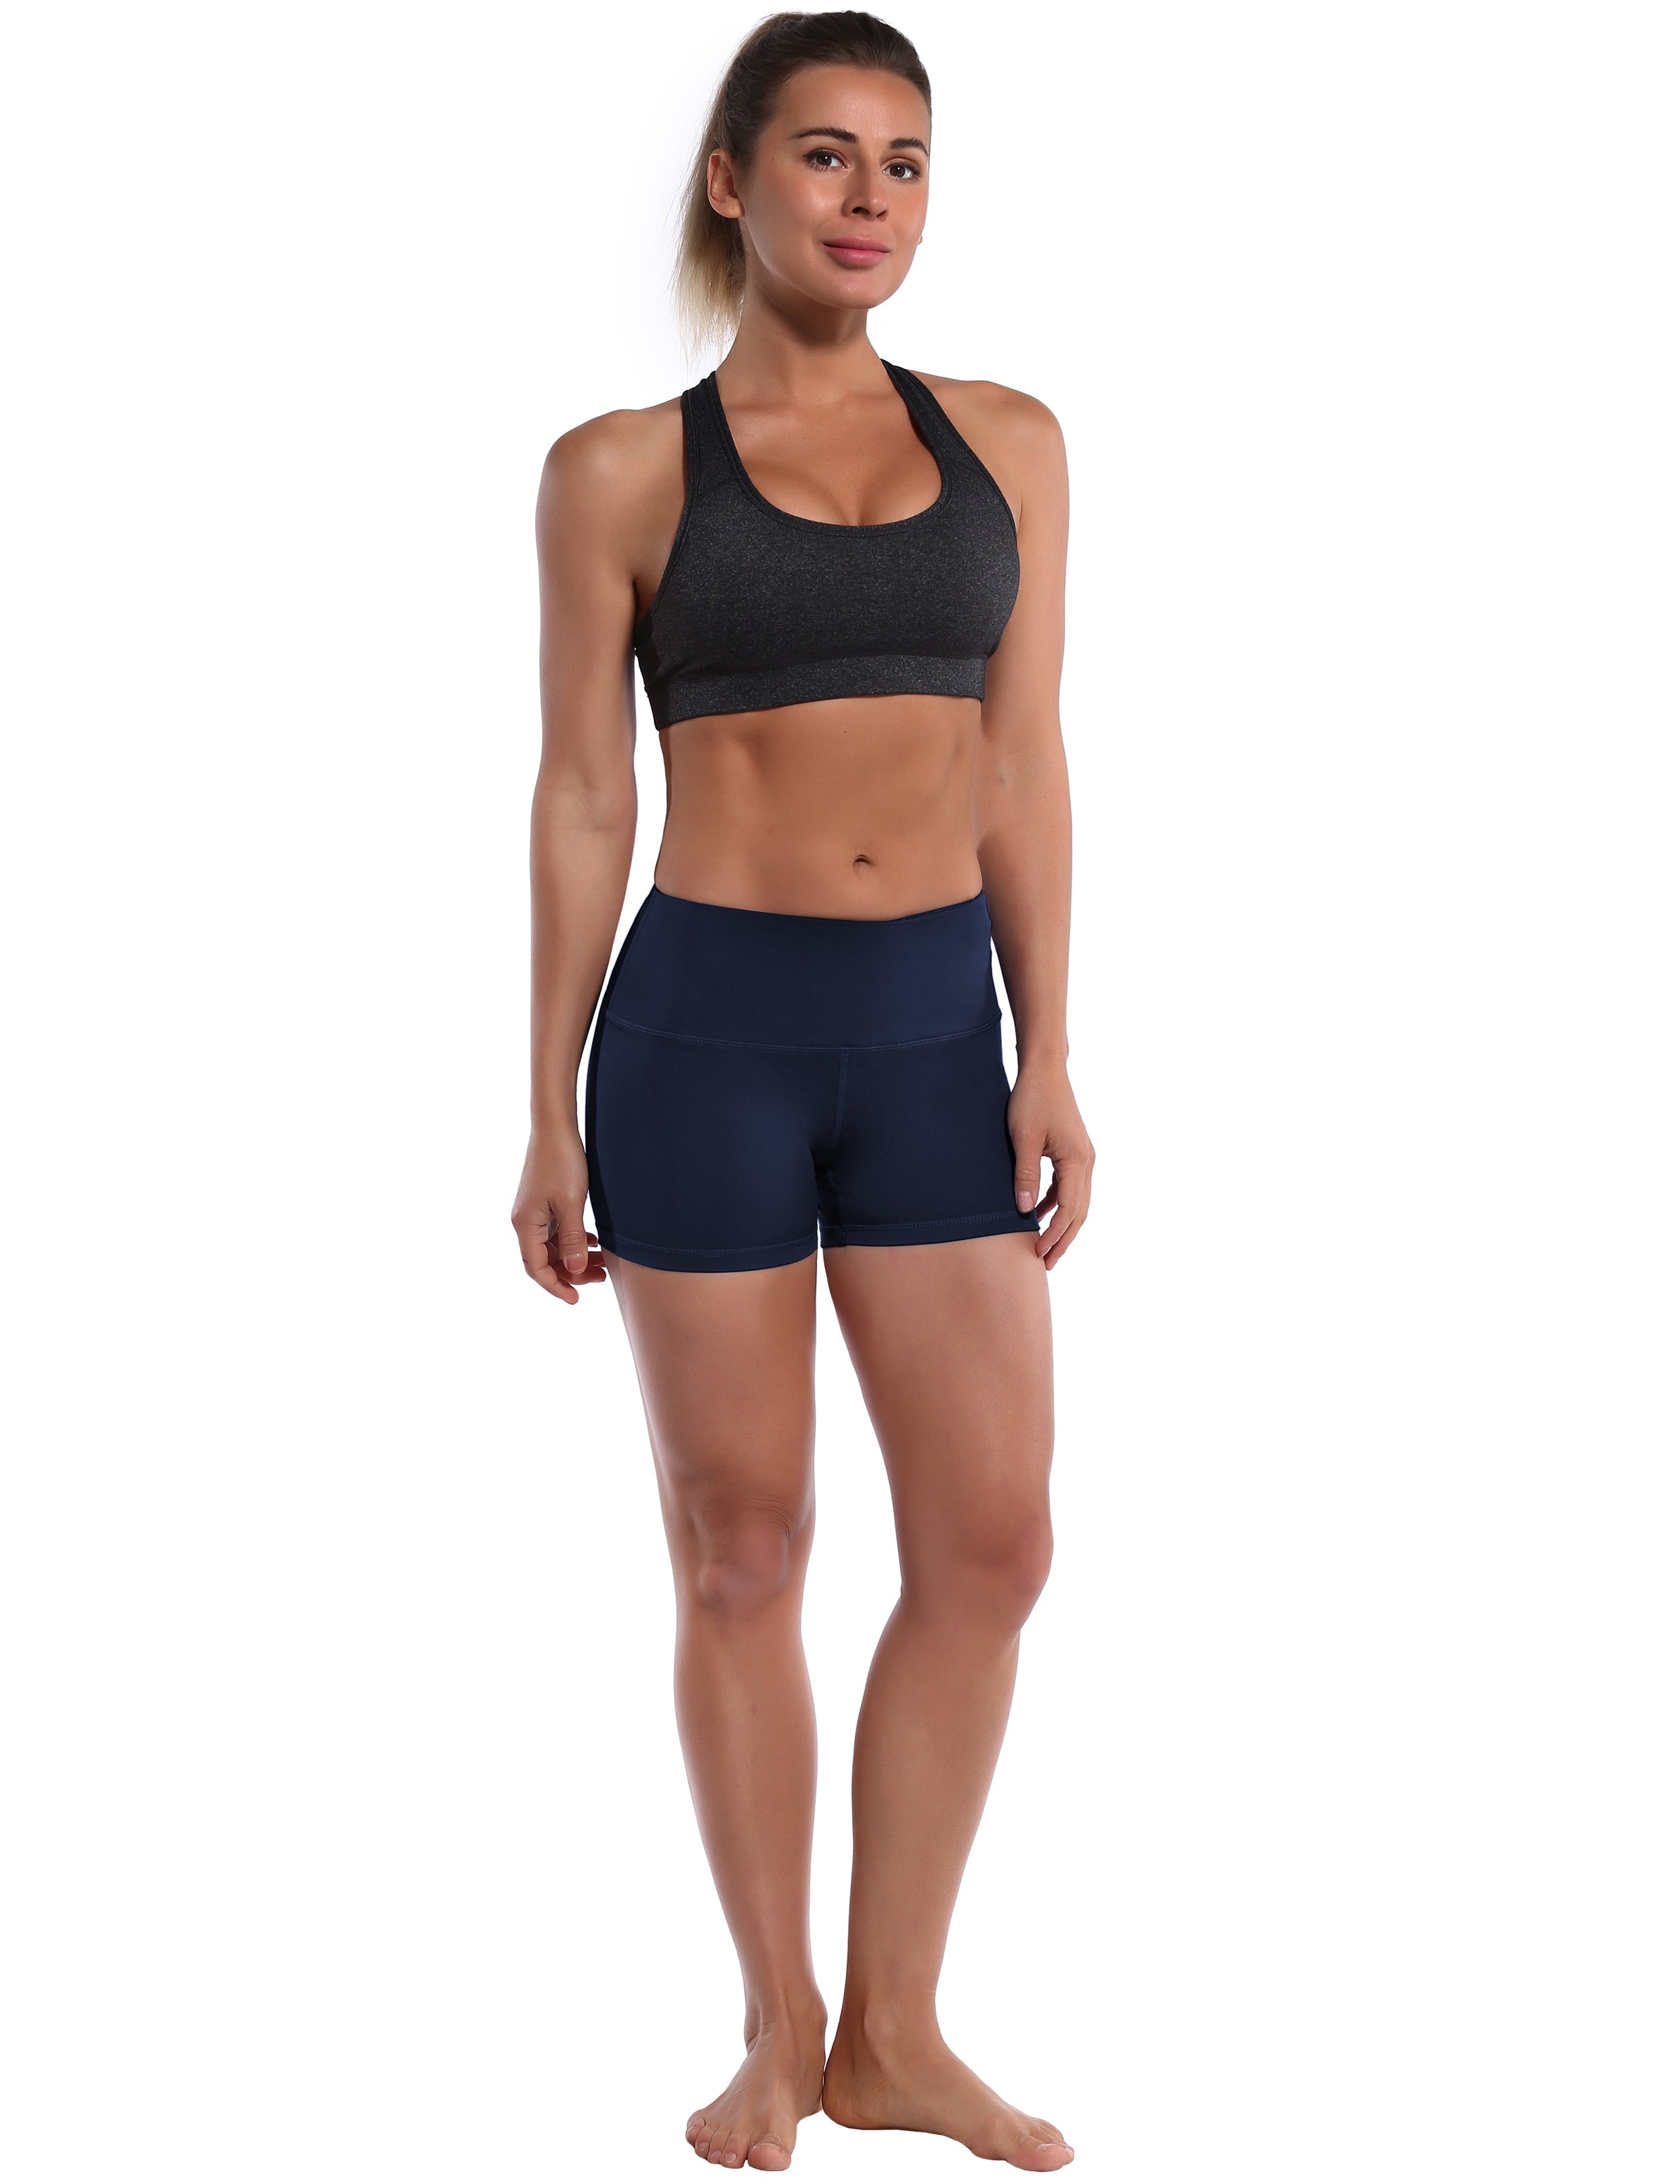 2.5" Golf Shorts darknavy Softest-ever fabric High elasticity High density 4-way stretch Fabric doesn't attract lint easily No see-through Moisture-wicking Machine wash 75% Nylon, 25% Spandex